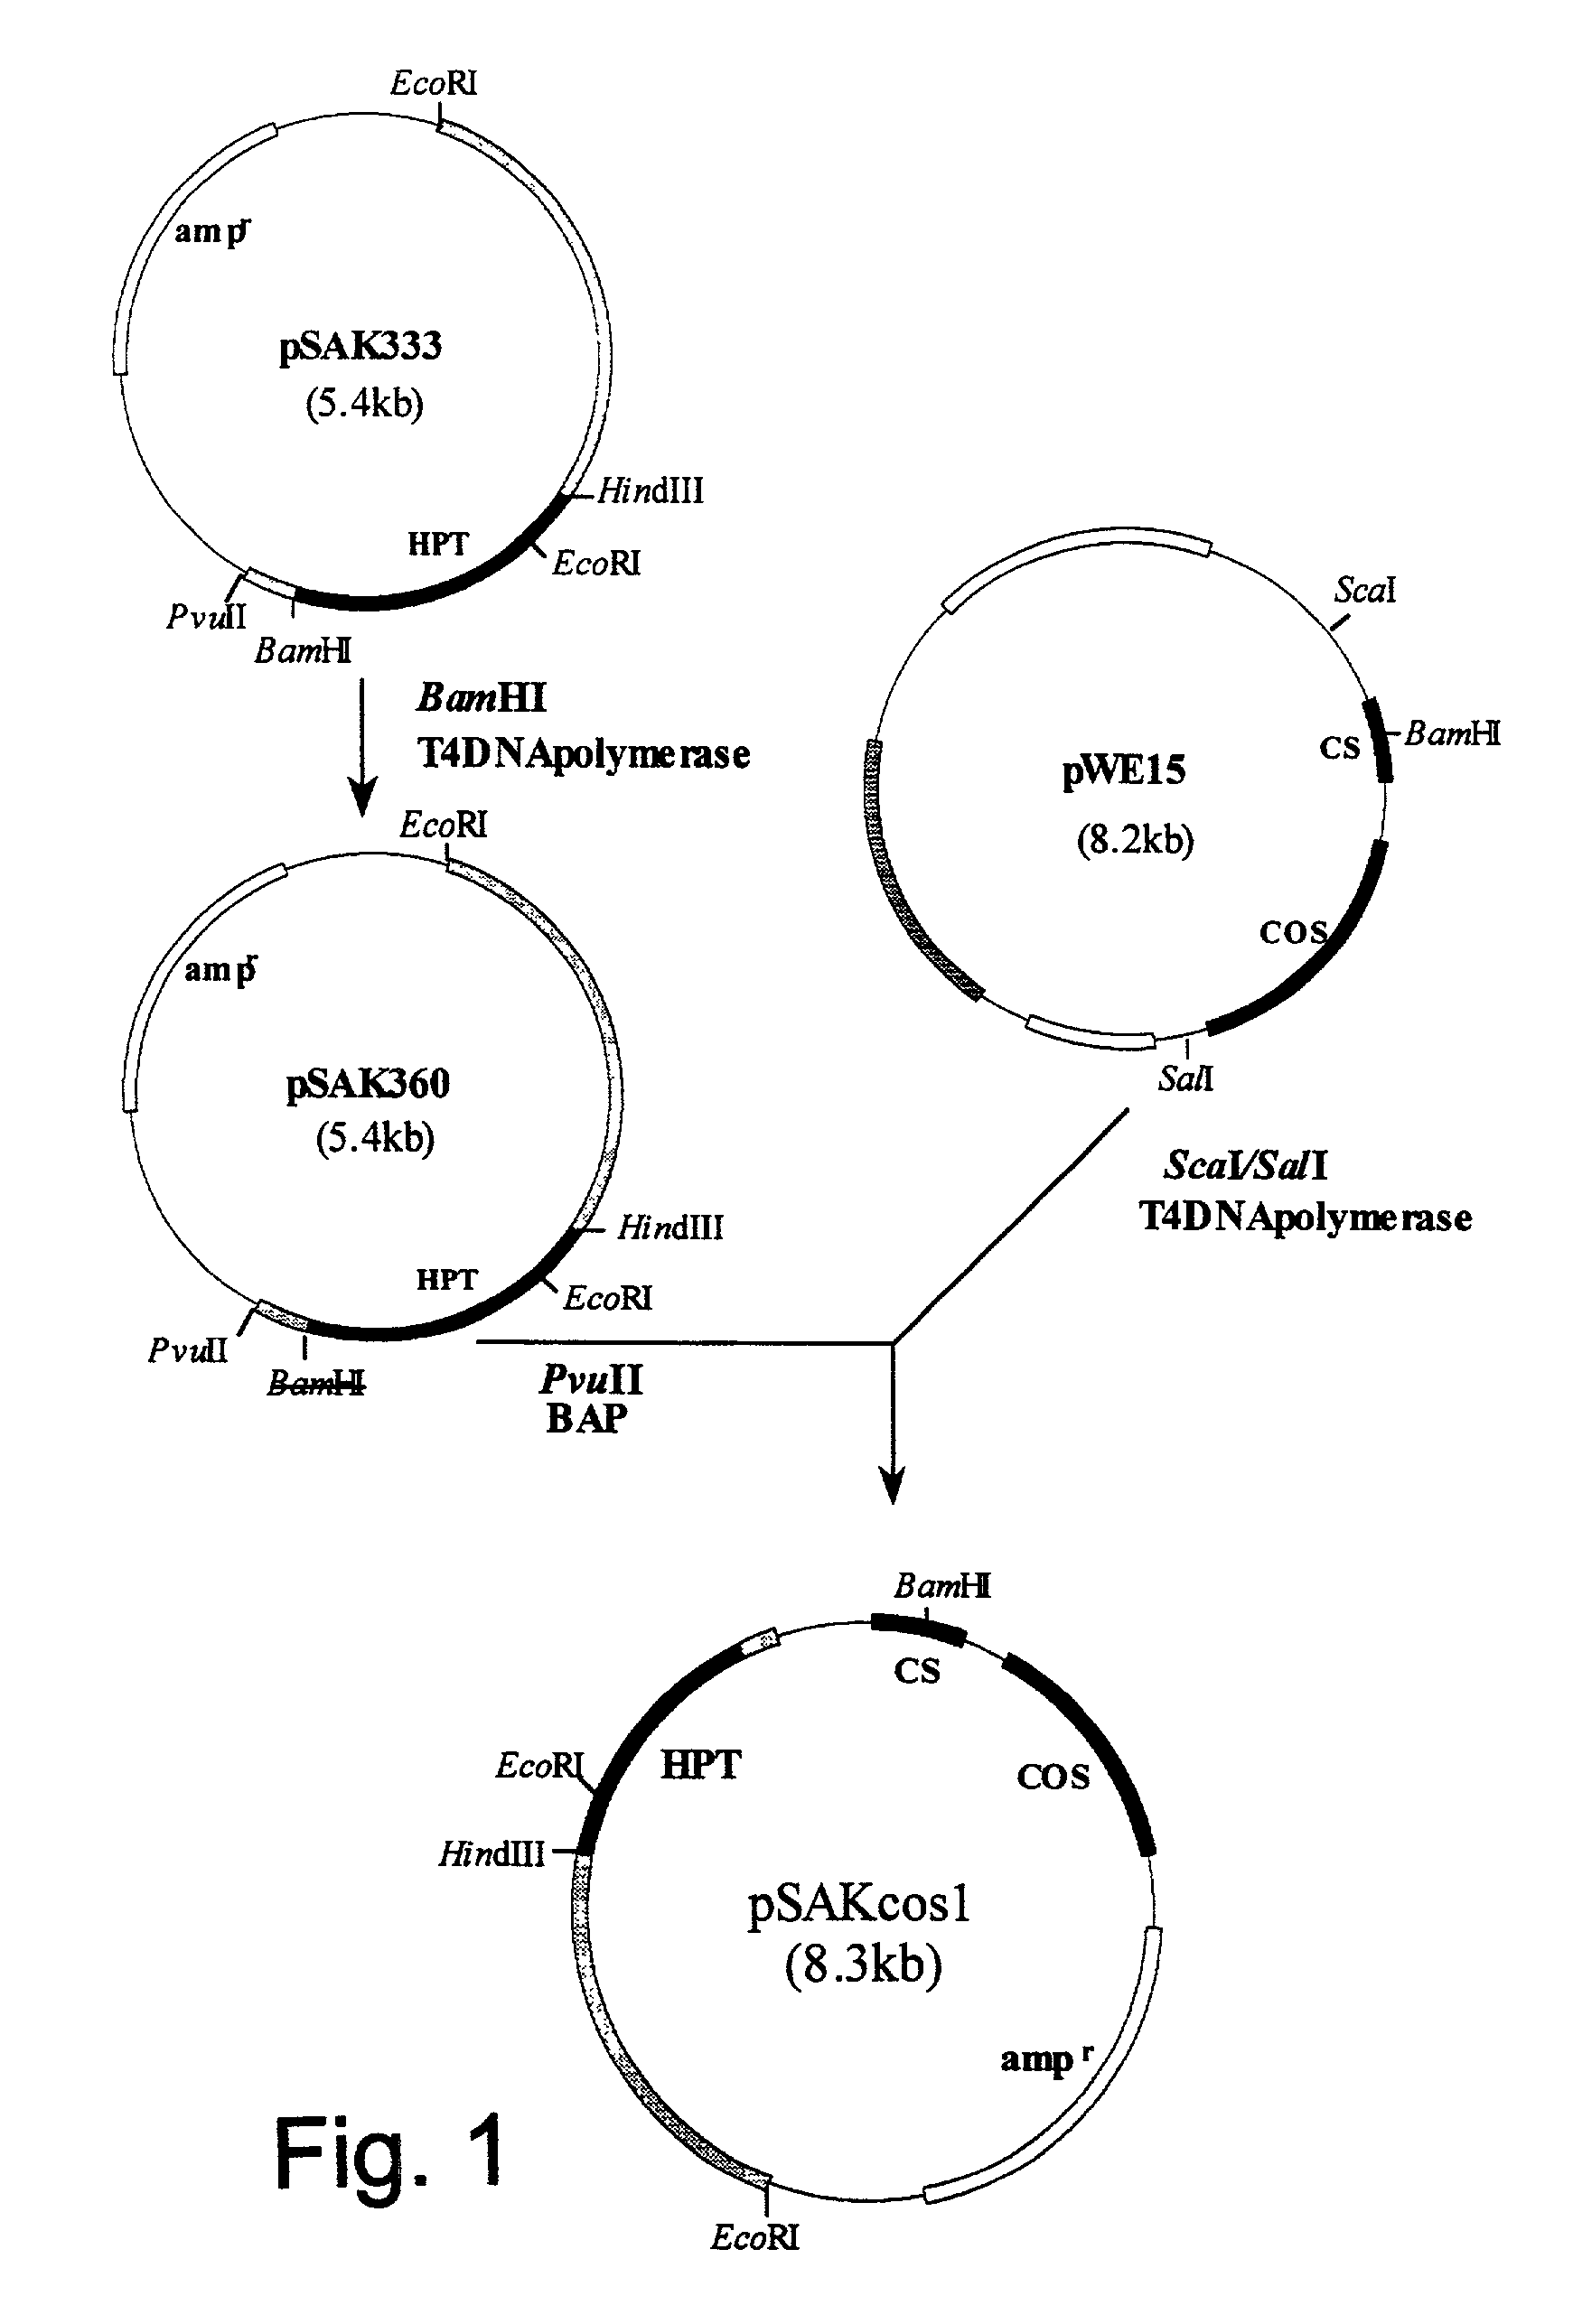 Genes from a gene cluster